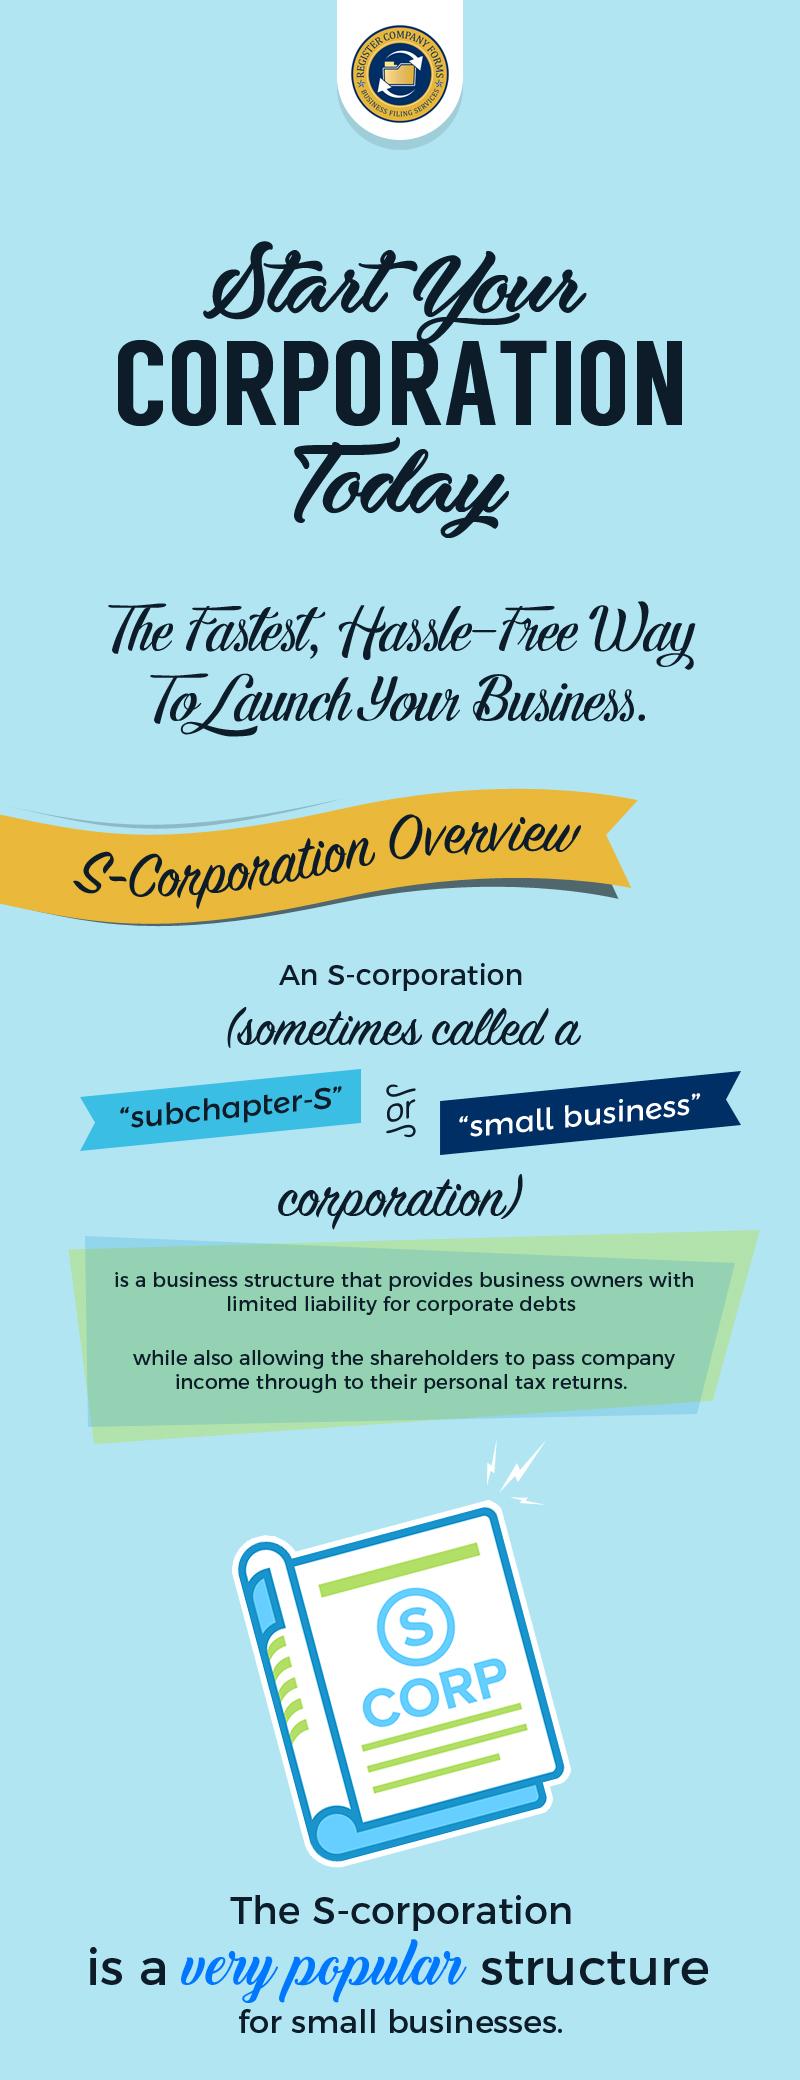 S-corporation - A Very Popular Structure For Small Businesses